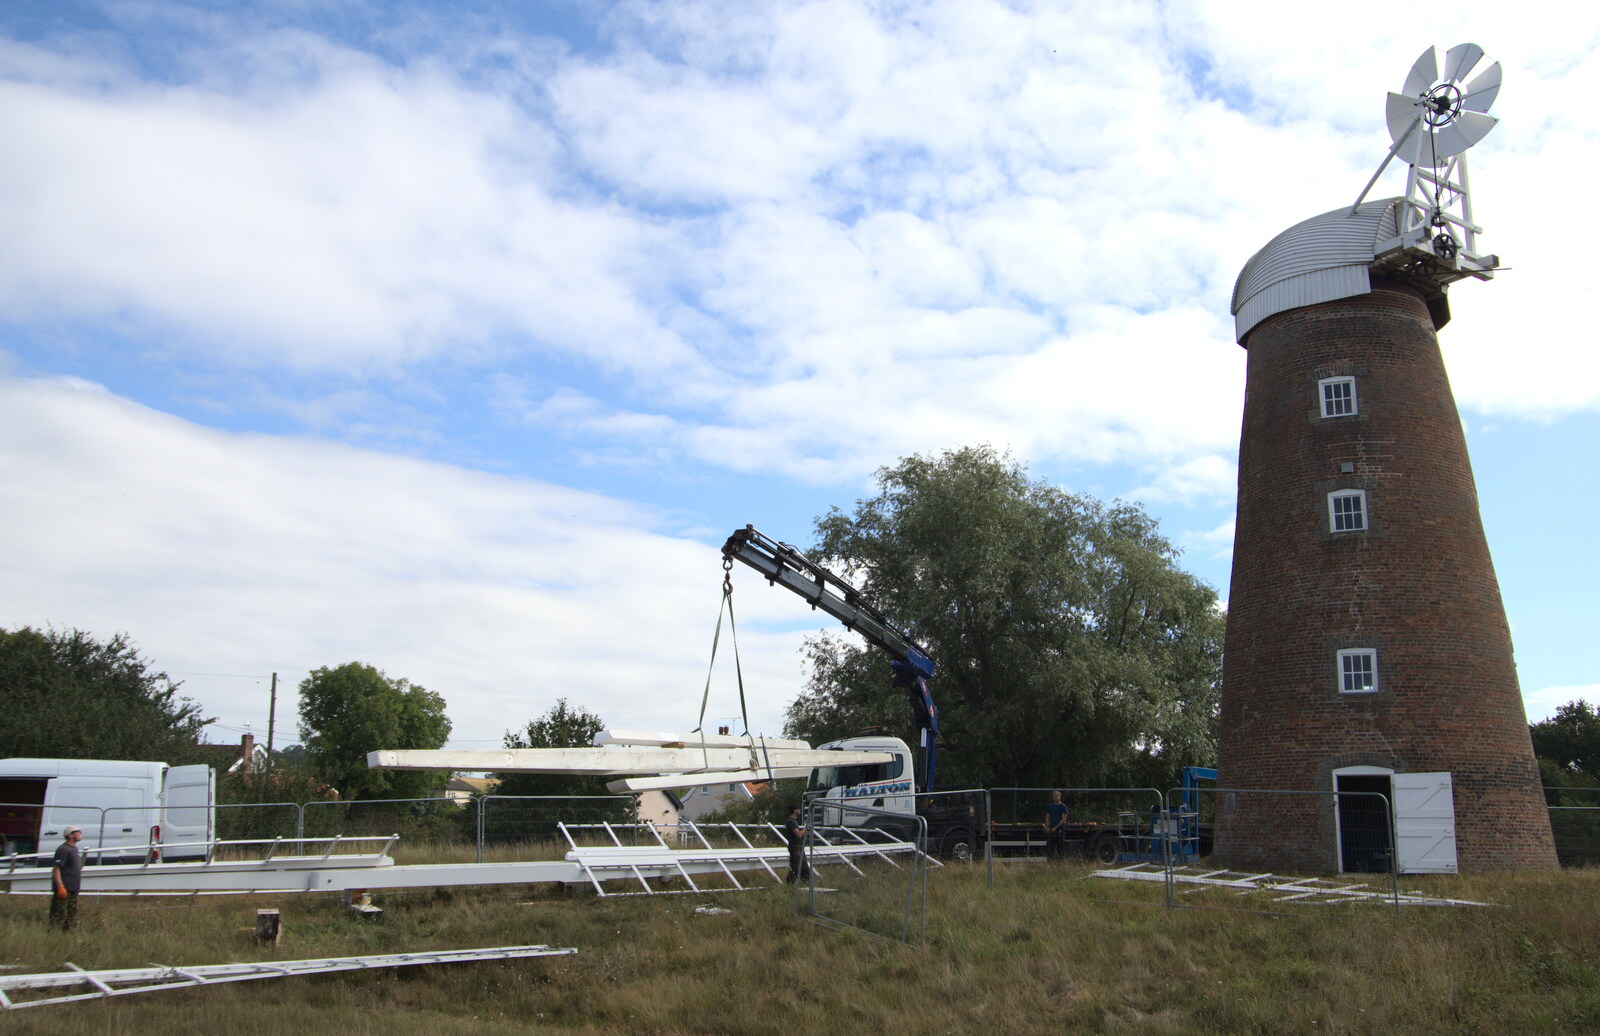 The arm is gingerly lifted off the ground from A Sail Fitting, Billingford Windmill, Billingford, Norfolk - 20th August 2020